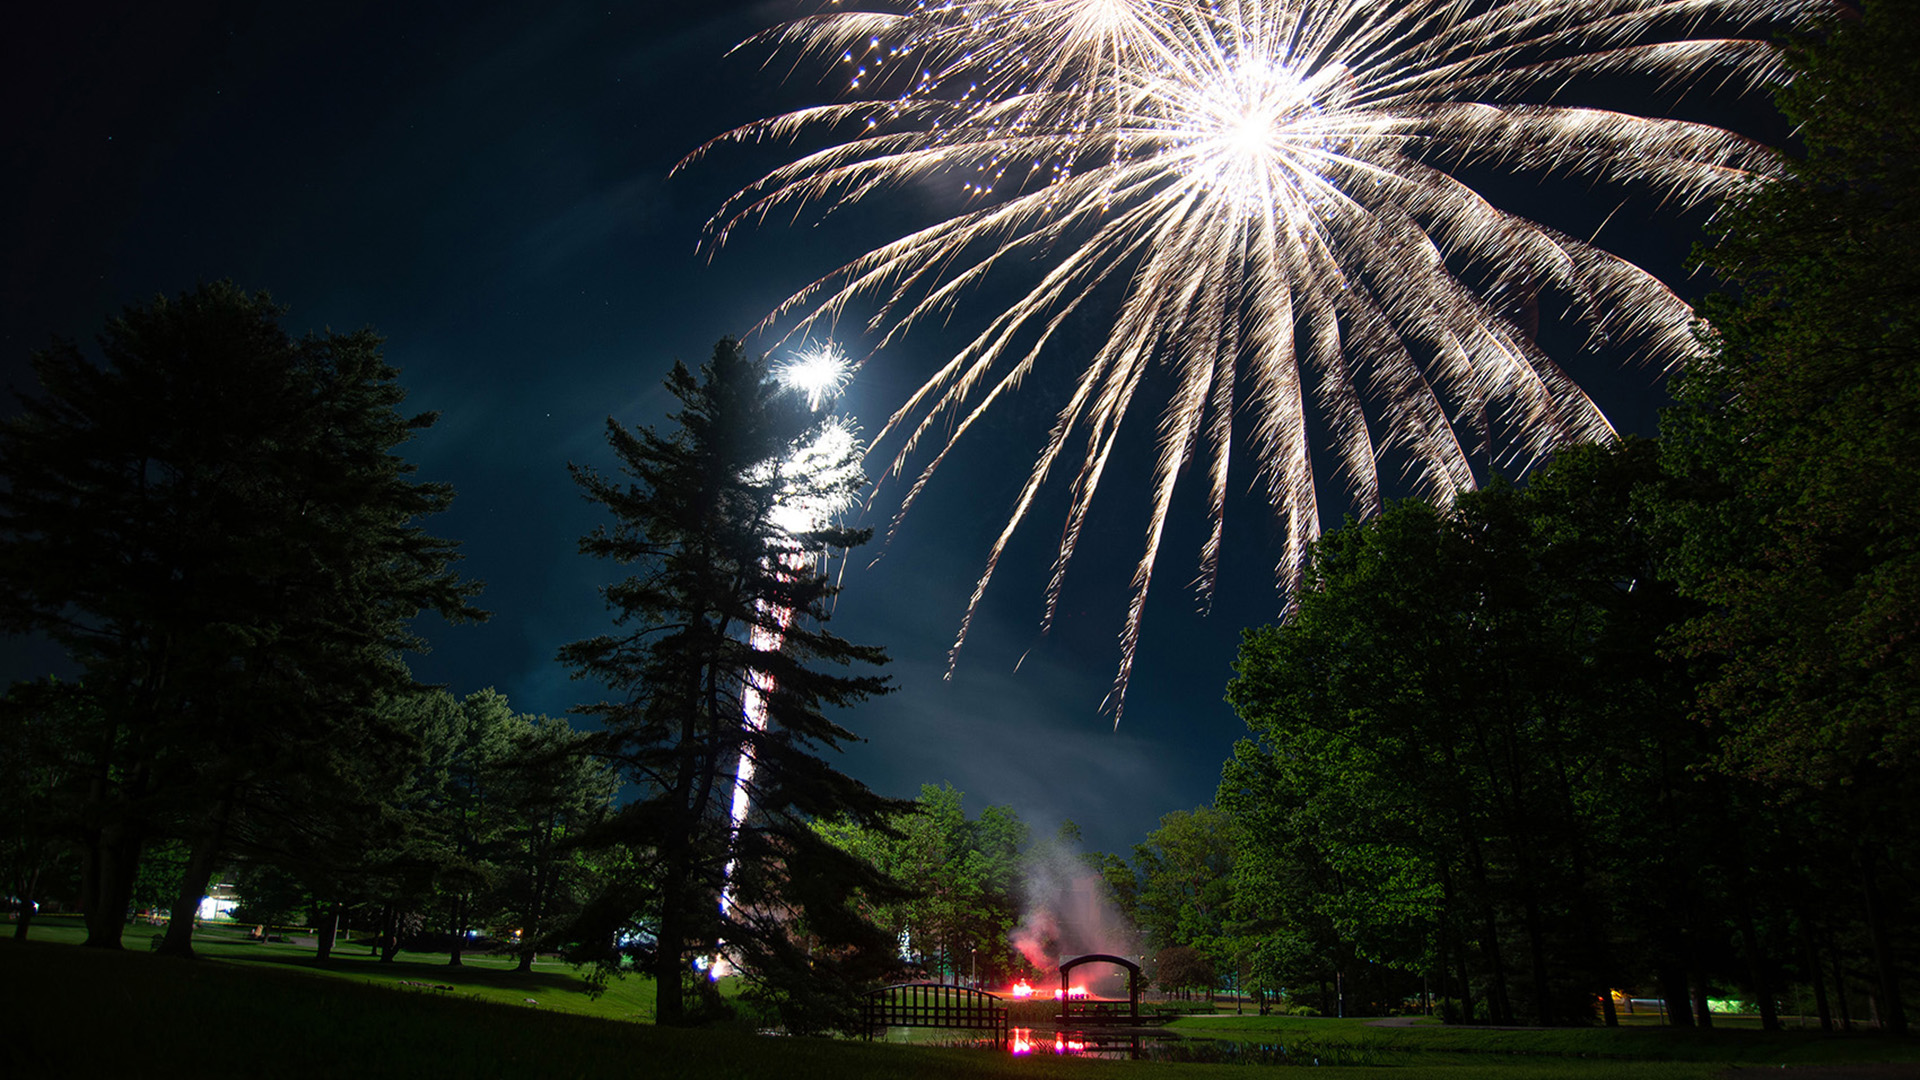 Fireworks over Haupt Pond viewed through trees